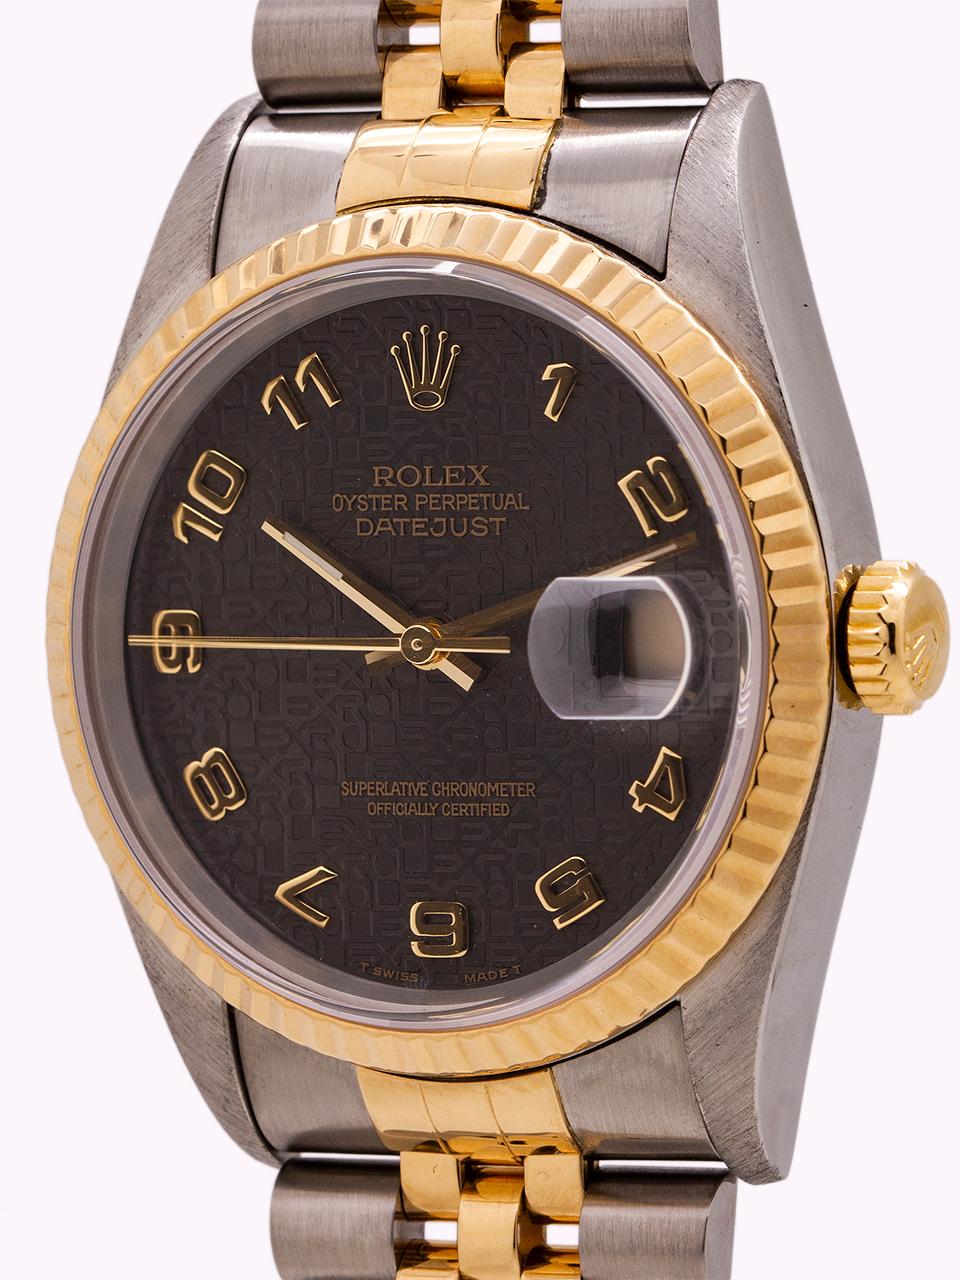 Rolex DateJust Ref# 16233 Stainless Steel and 18 Karat Jubilee Dial, circa 1993 In Excellent Condition For Sale In West Hollywood, CA